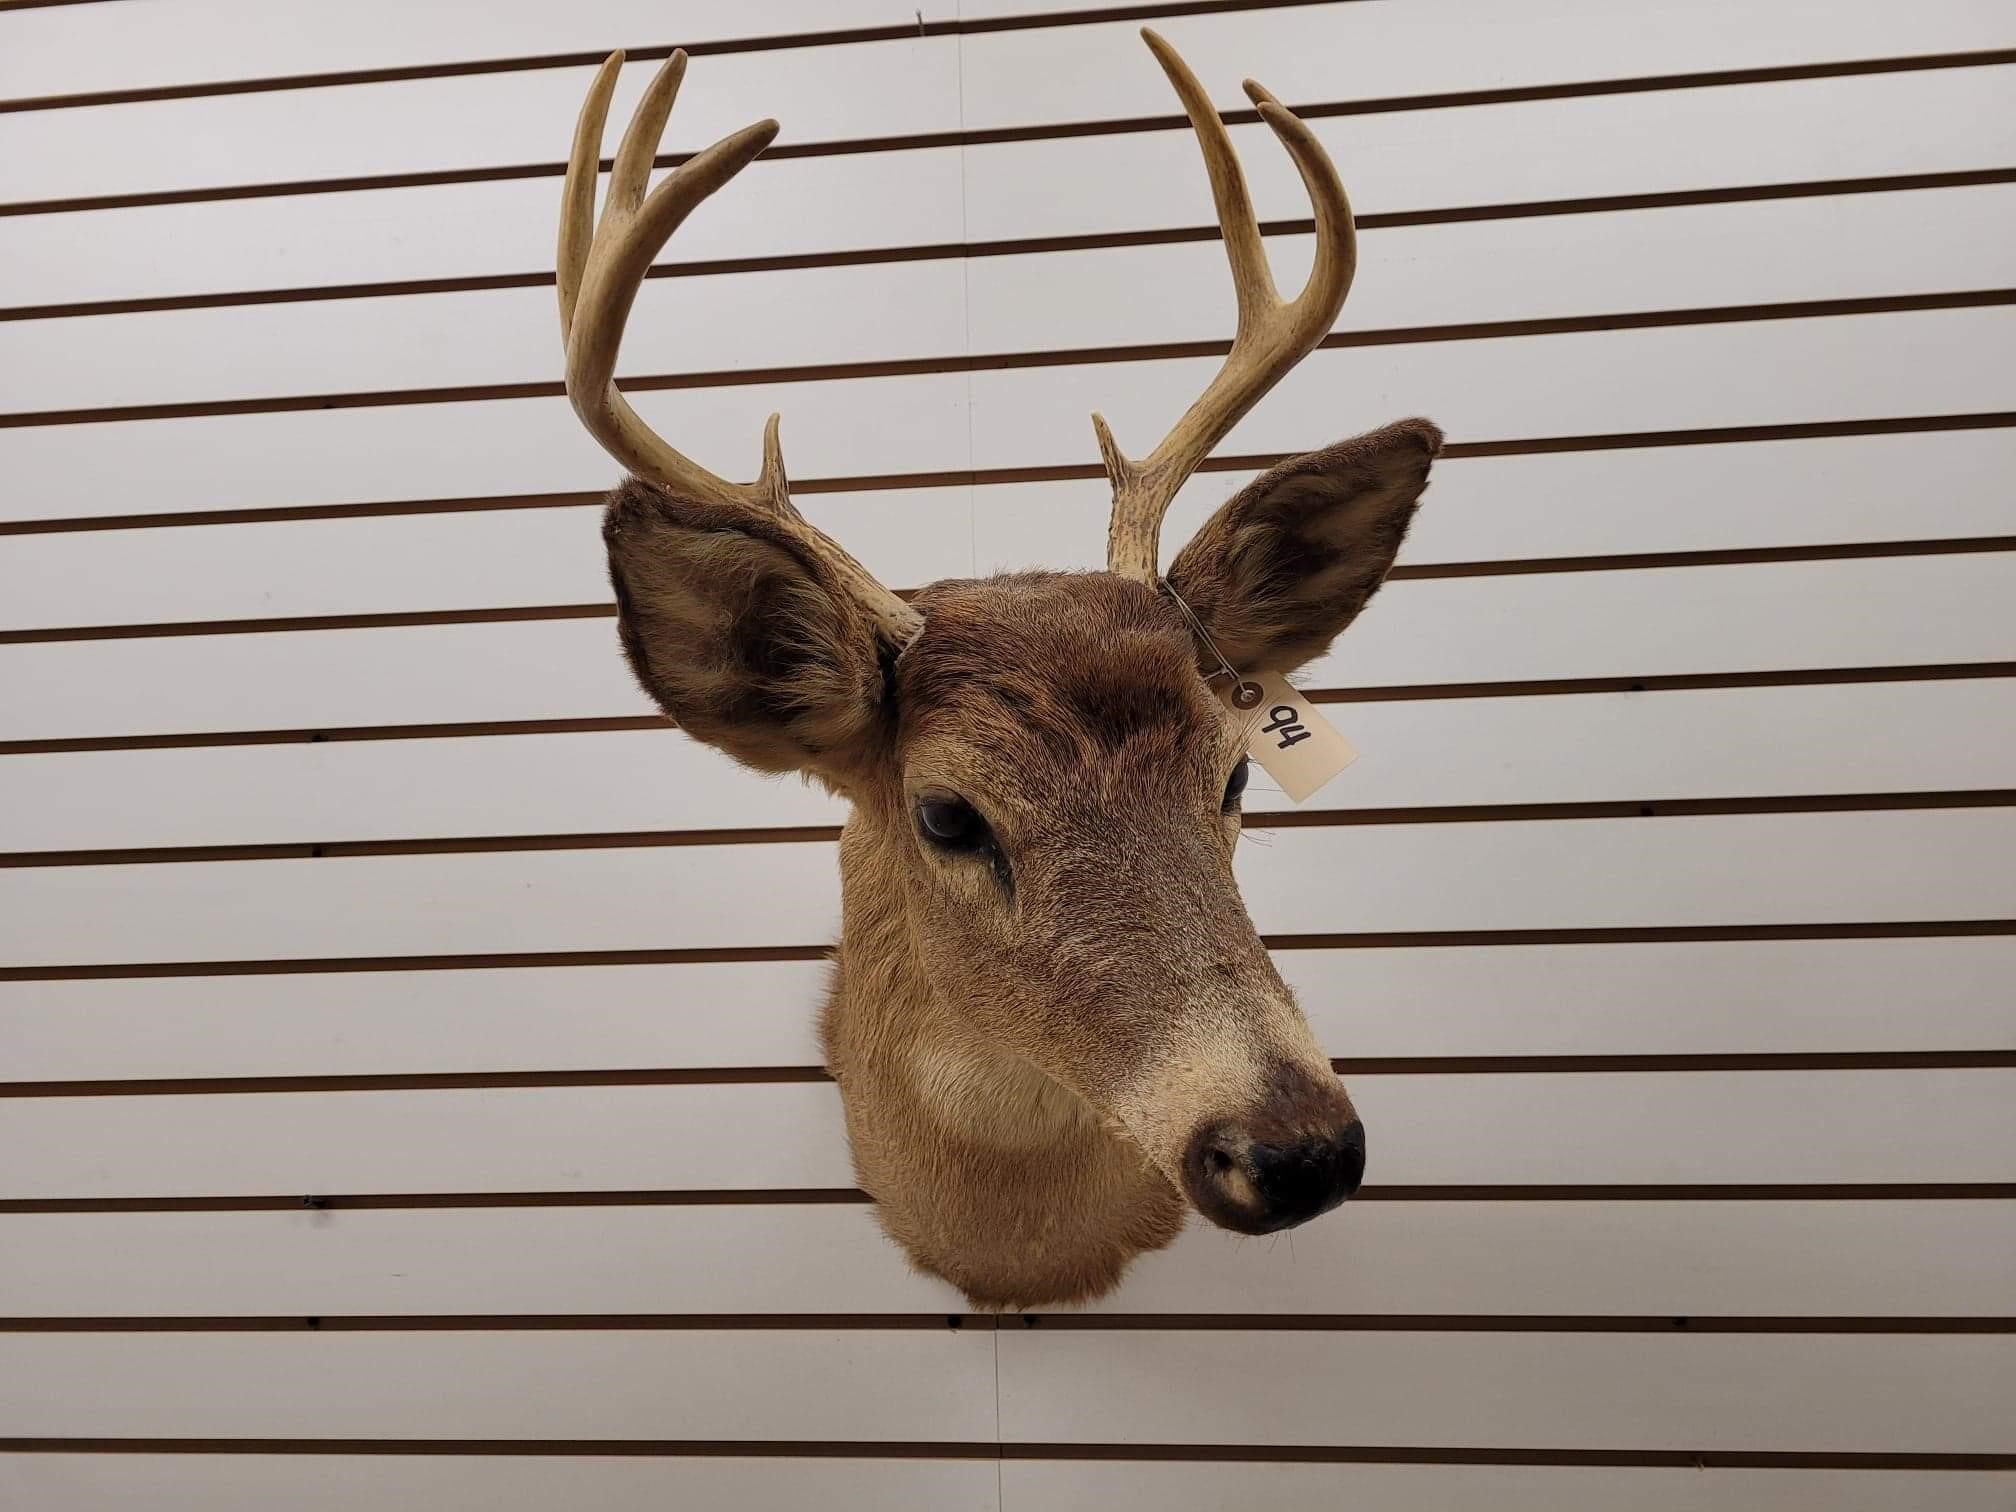 4/24/2021 Taxidermy Auction